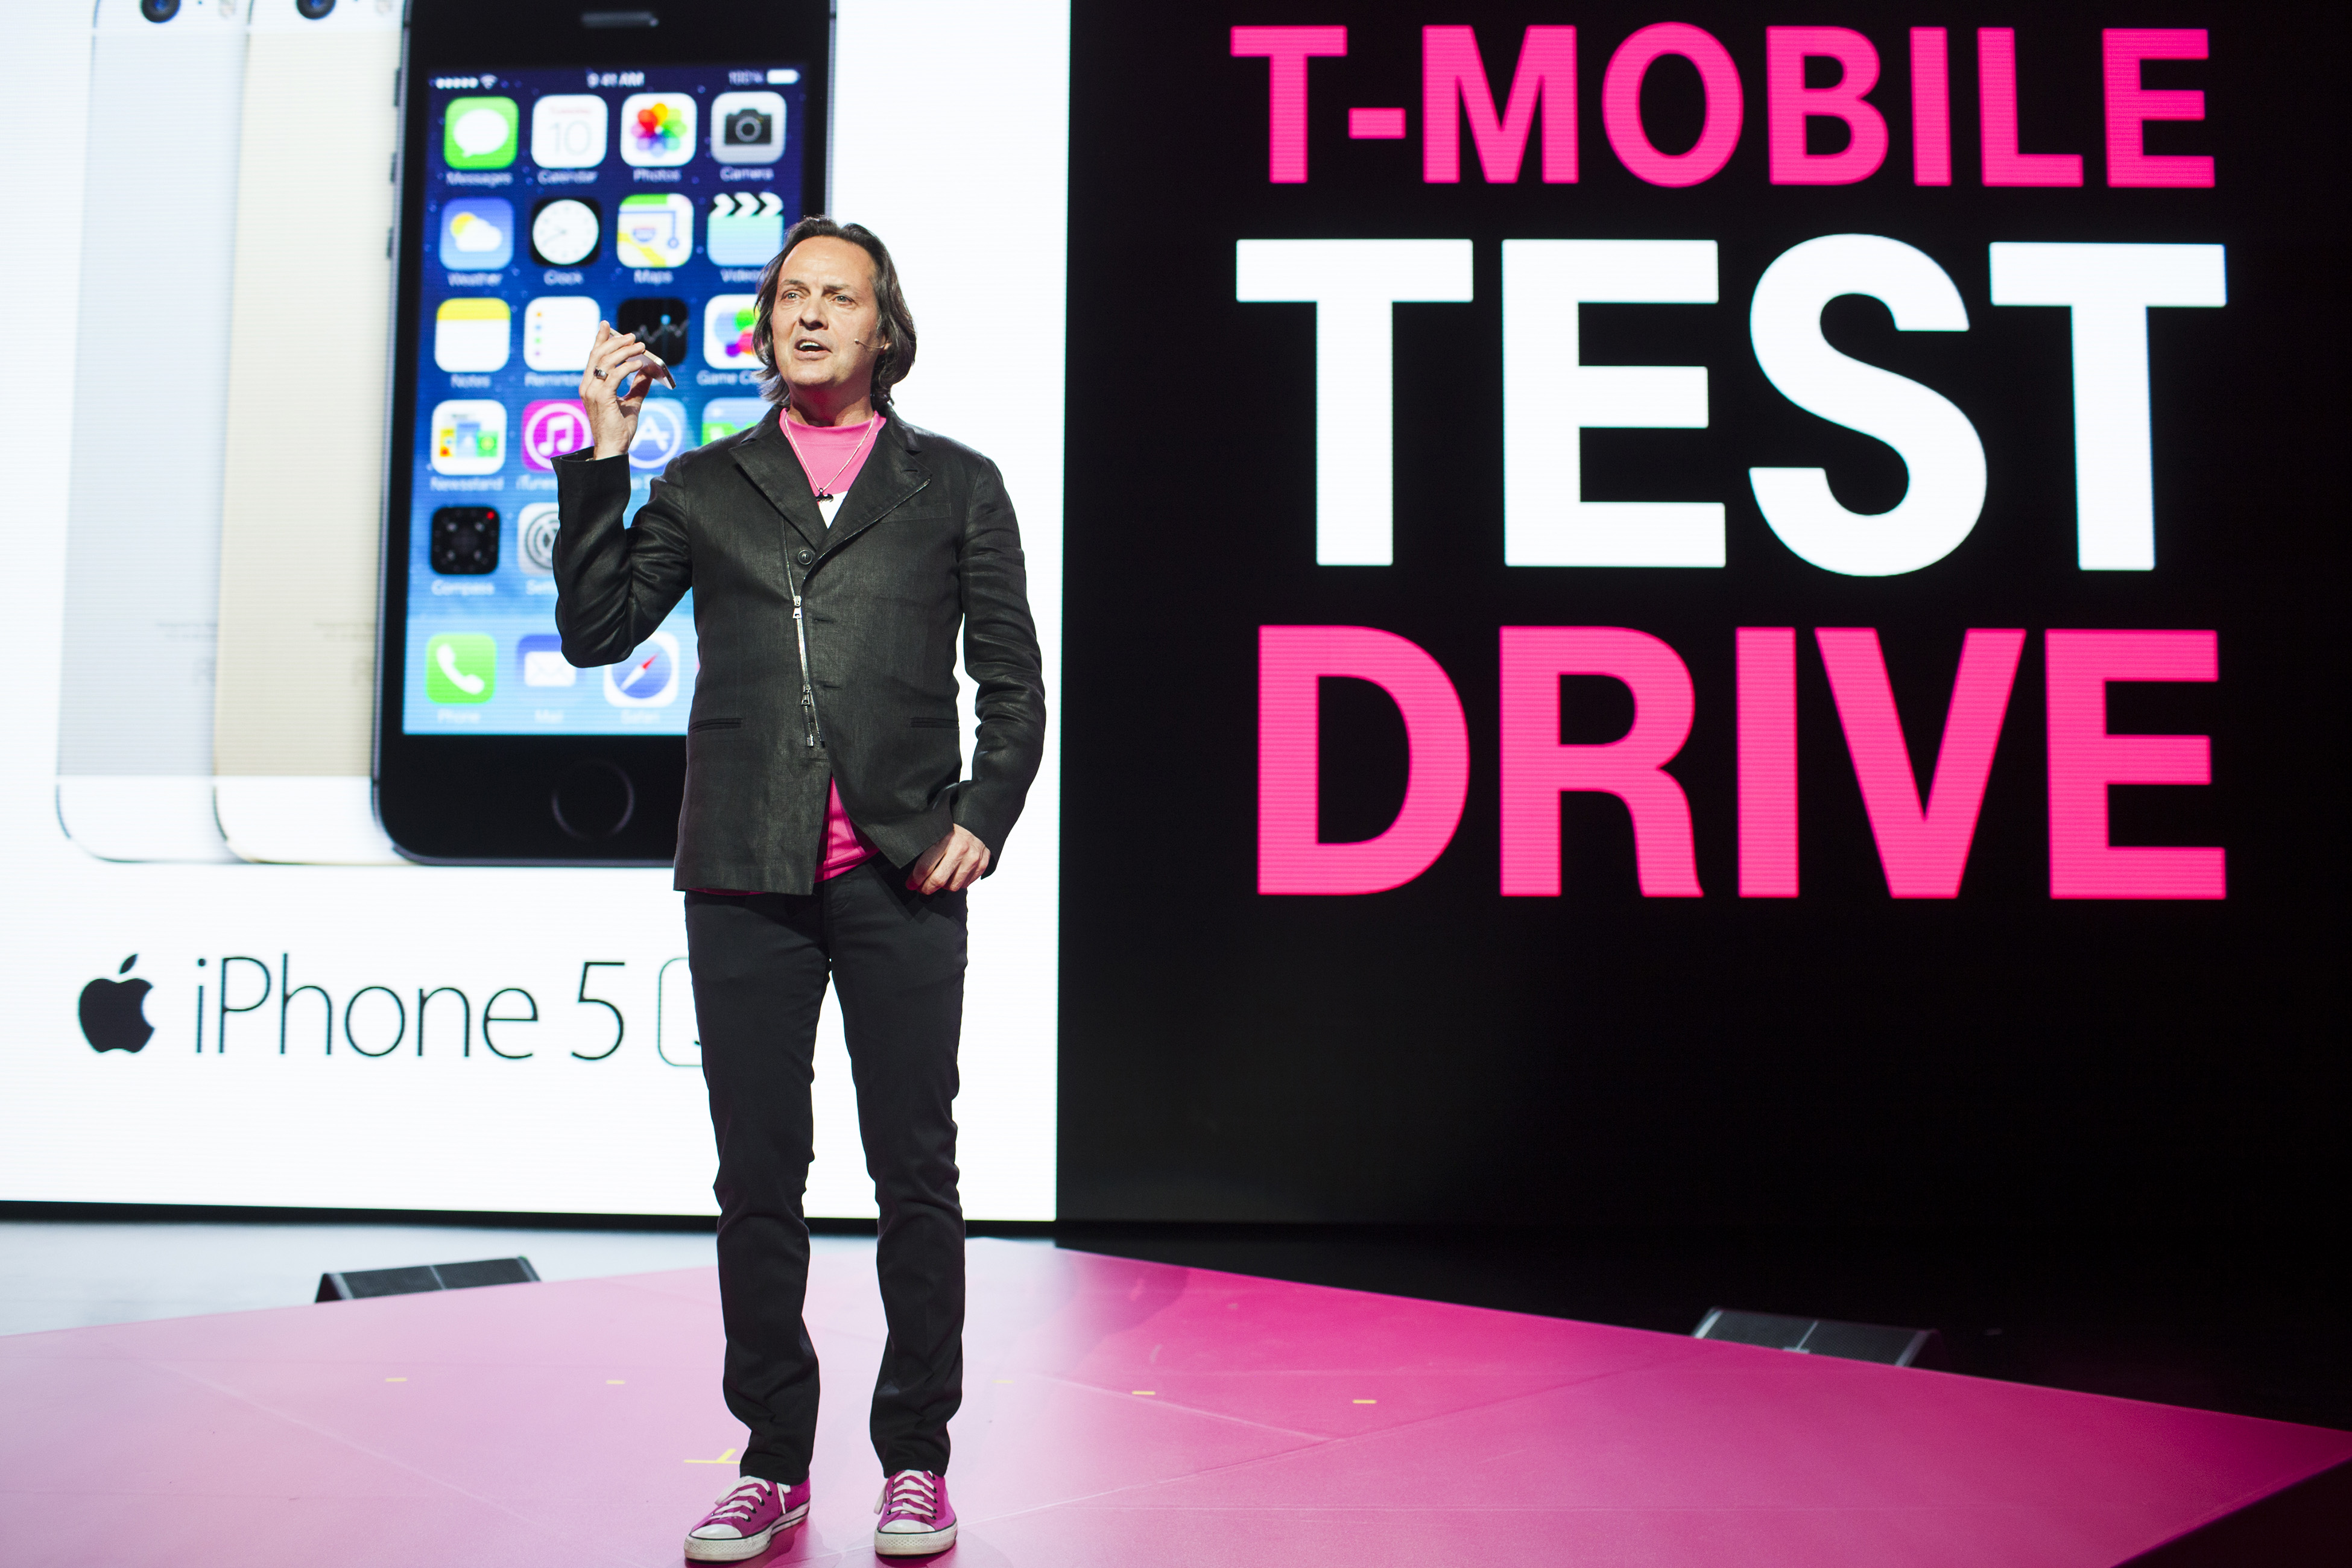 John Legere, chief executive officer of T-Mobile US Inc., holds an Apple Inc. iPhone as he speaks during an event in Seattle, Washington, U.S., on Wednesday, June 18, 2014. (Bloomberg/Getty Images)